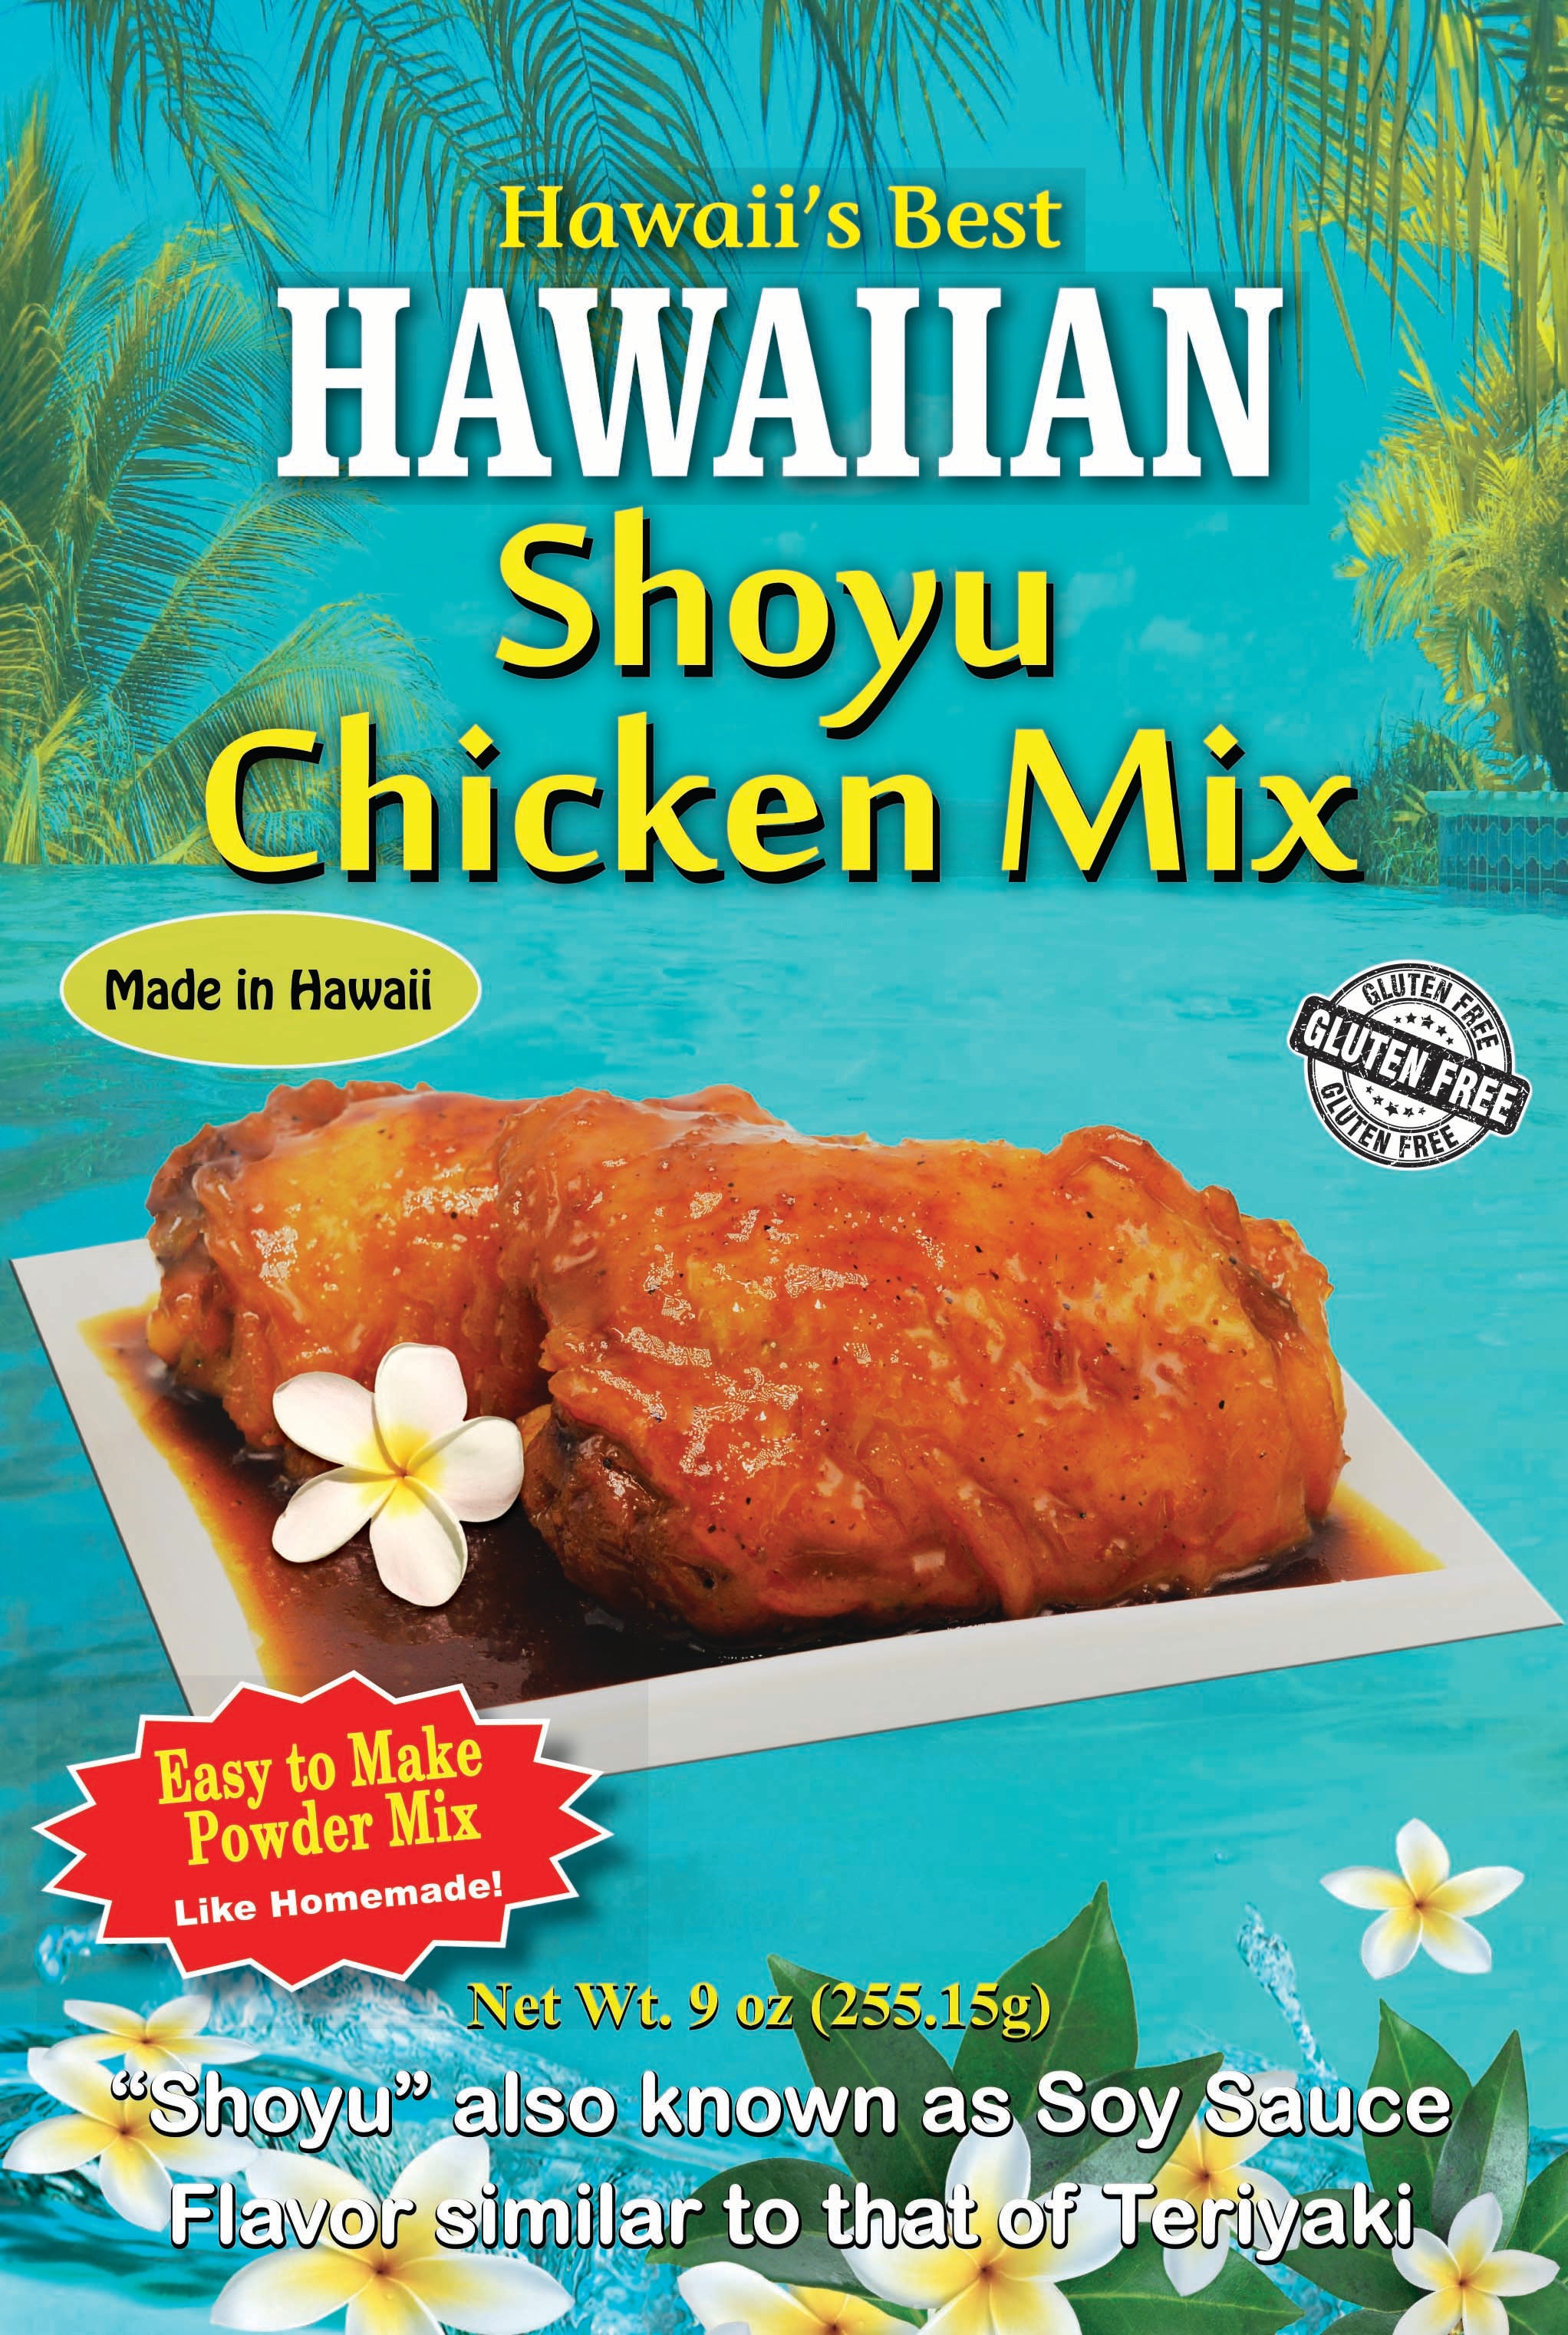 Free Shipping! (10 BAGS - EXTRA VALUE PACK, $5.49 EACH!) SHOYU CHICKEN MIX, $5.49 EACH BAG, Specialty Item, HAWAIIAN STYLE SHOYU CHICKEN